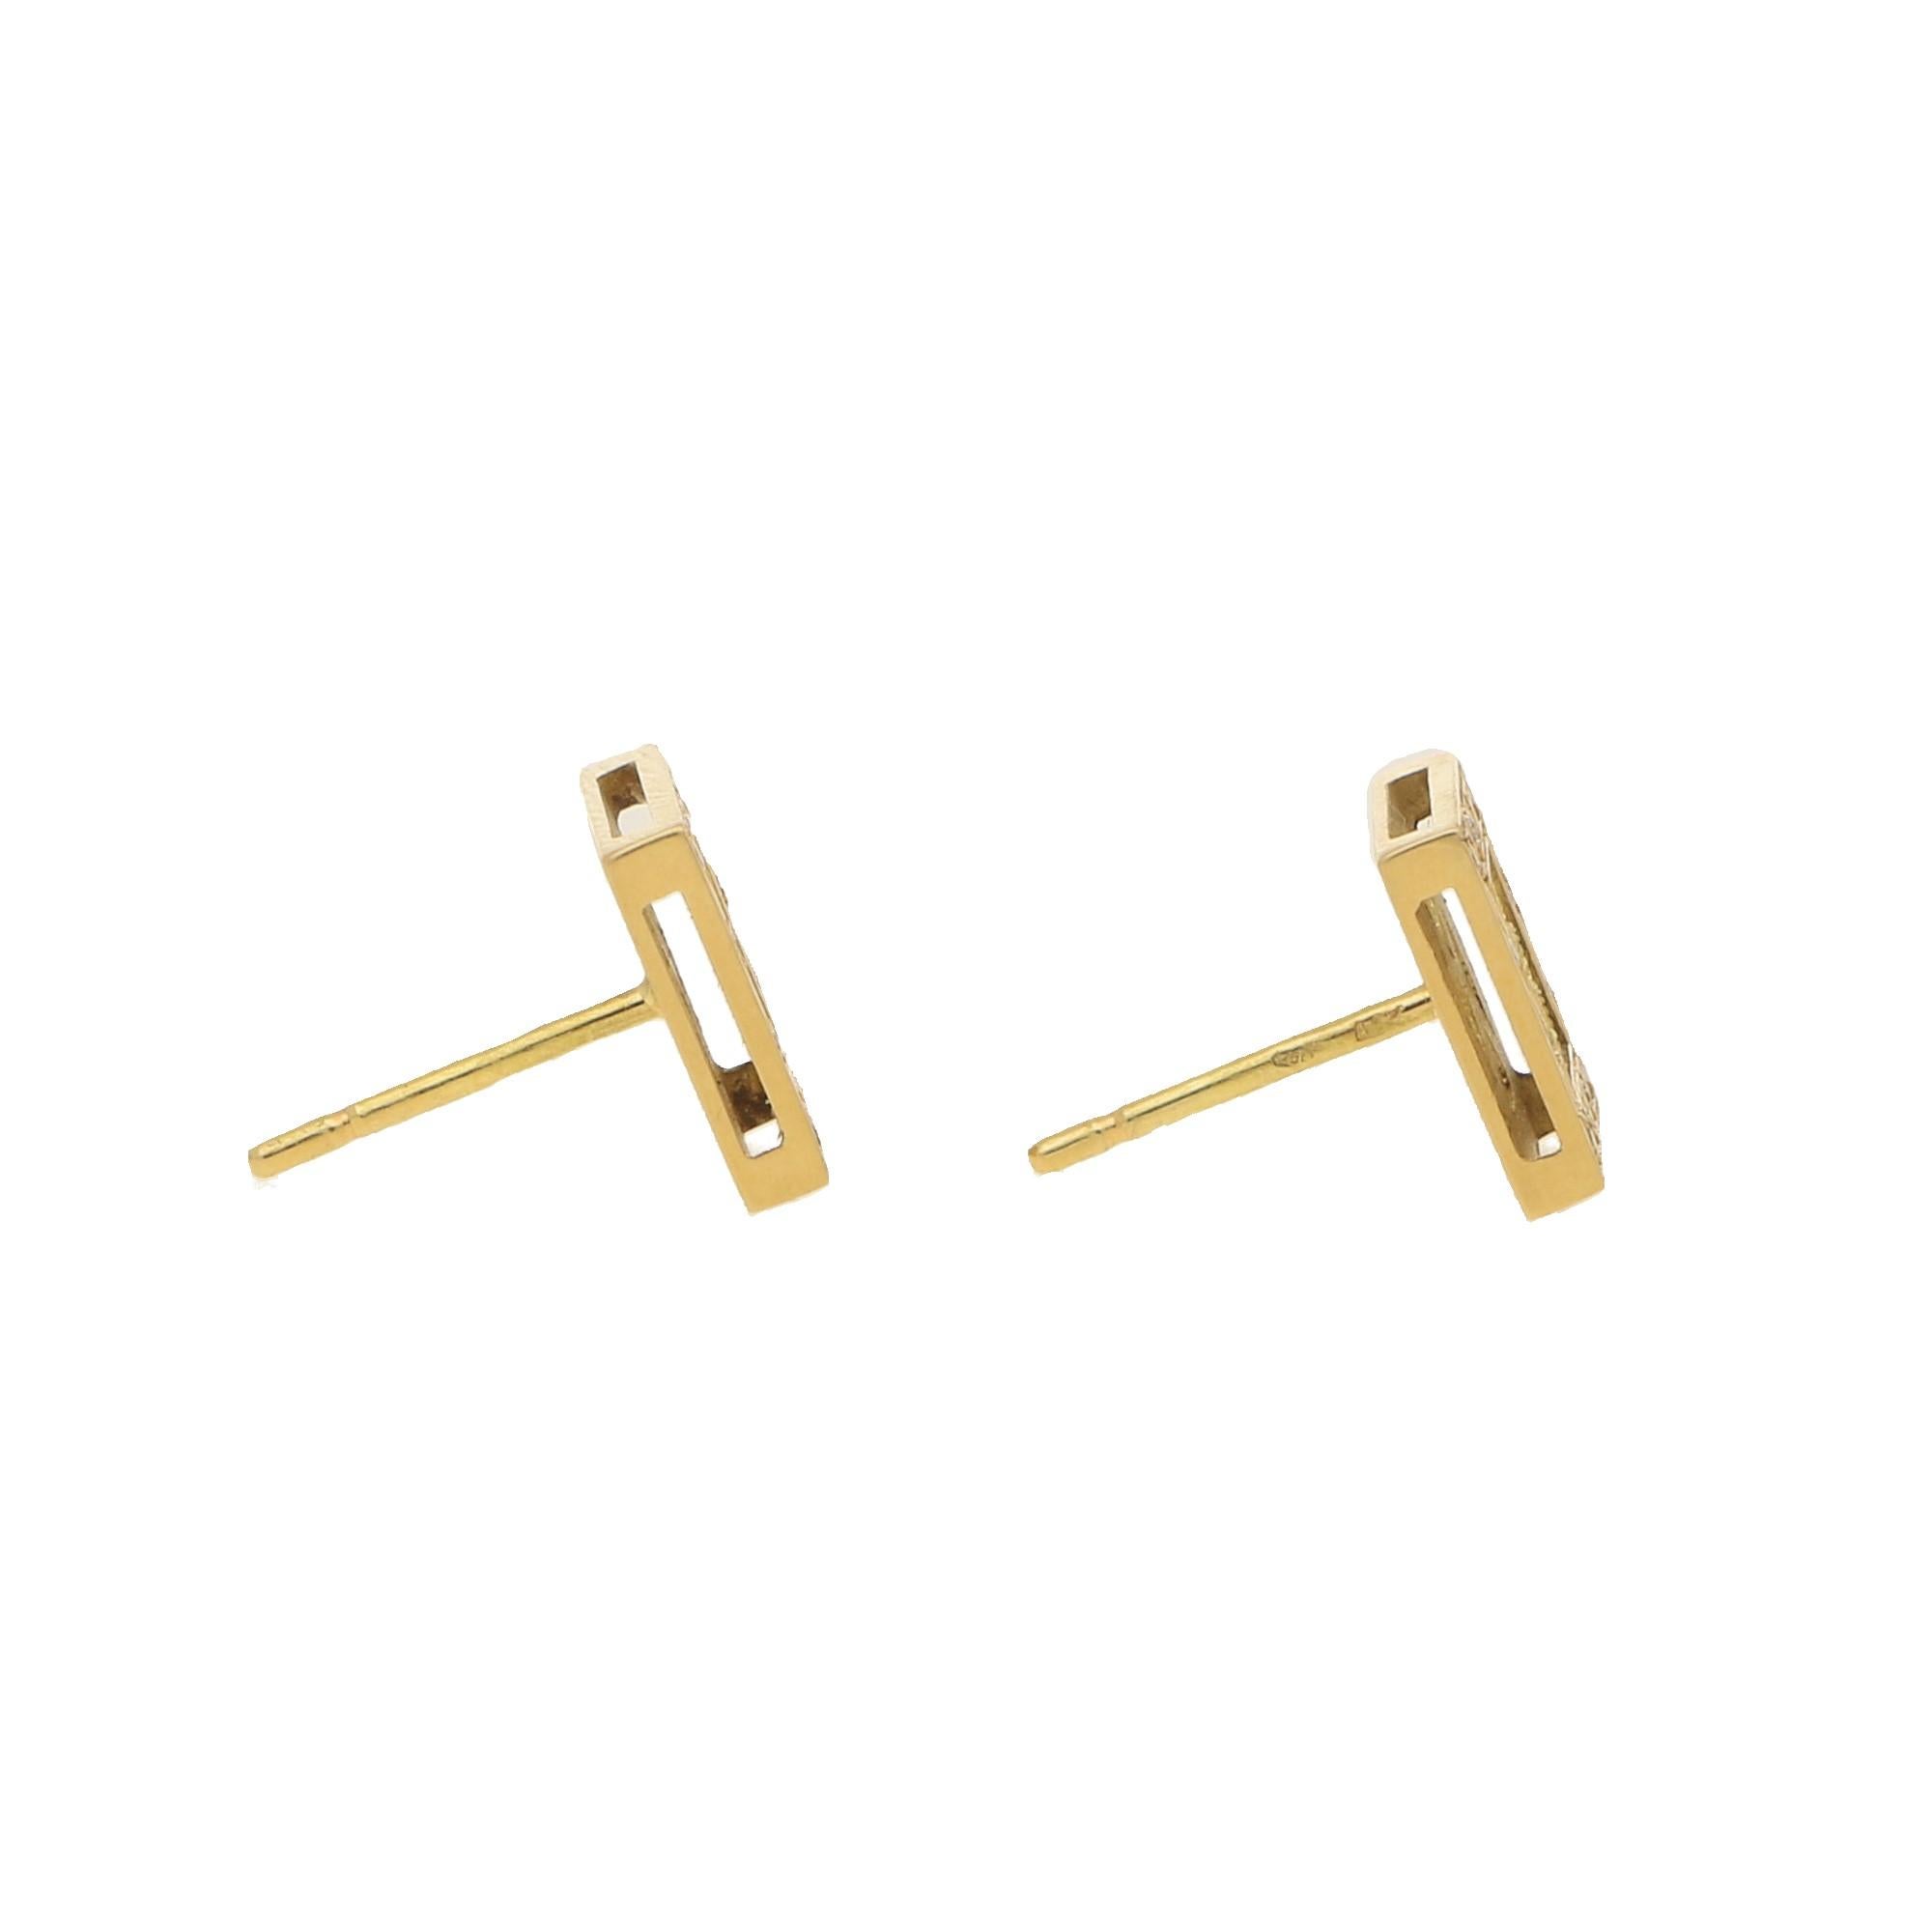 A pair of diamond filigree stud earrings in 18ct yellow gold. Each earring is composed of a squared surmount decorated with an openwork filigree floral spray to the centre. Within this is a yellow gold frame grain-set with 12 round brilliant-cut